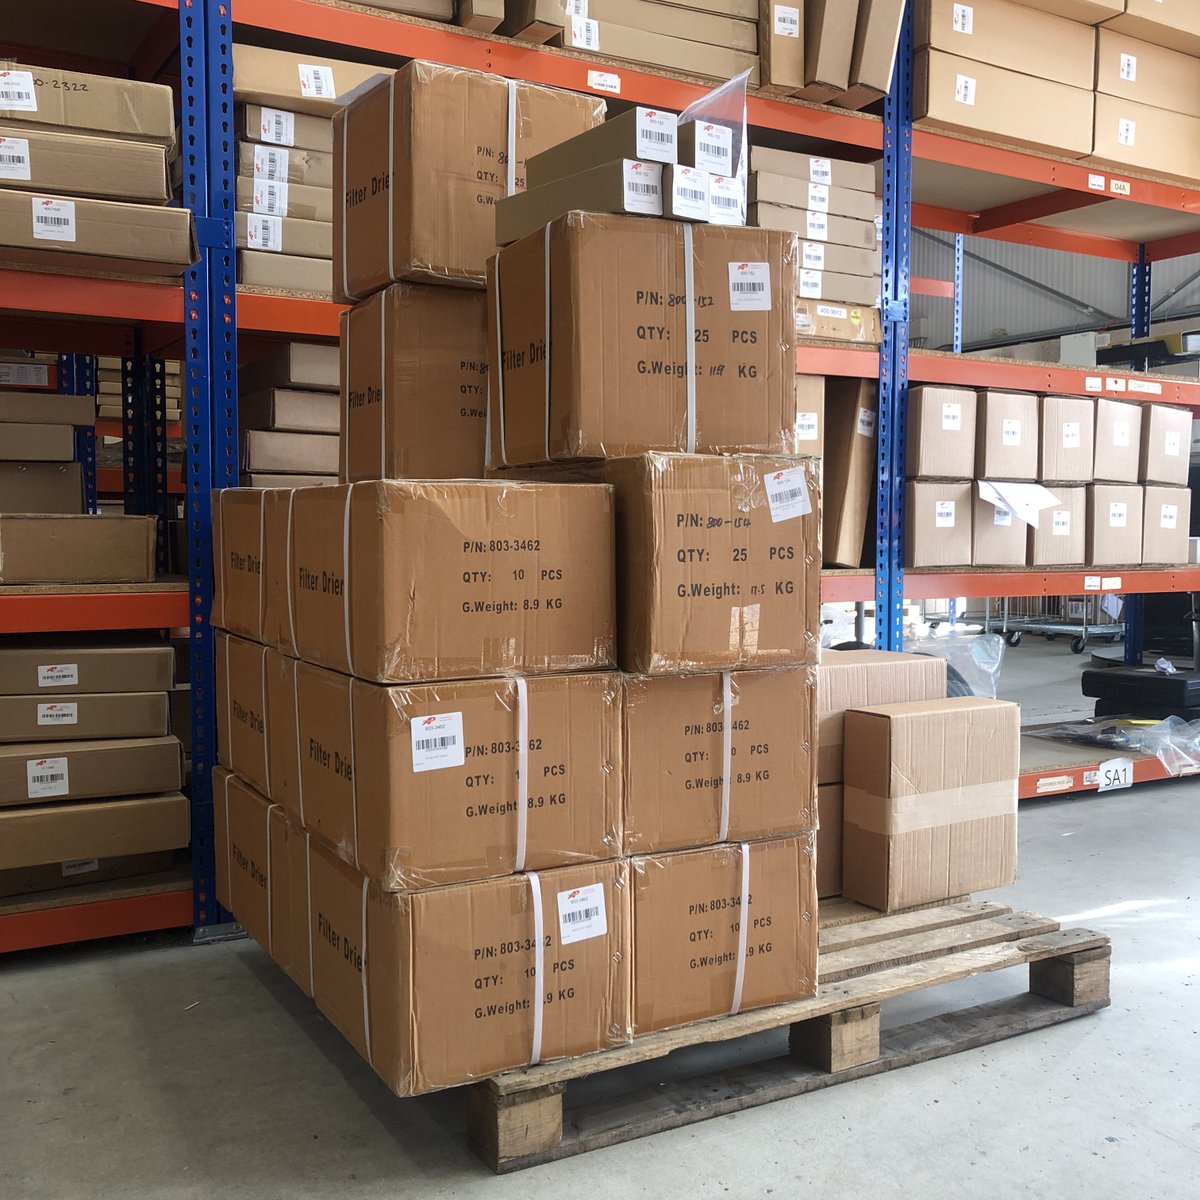 🚜❄️📦 Stocked up and ready to dispatch, the warehouse is in full swing! 💪
#airconparts #acspares #hvac #agriculturalmachinery #farmmachinery #harvest2024 #tractorparts #oem #aftermarketparts #constructionmachinery #planthire #orders